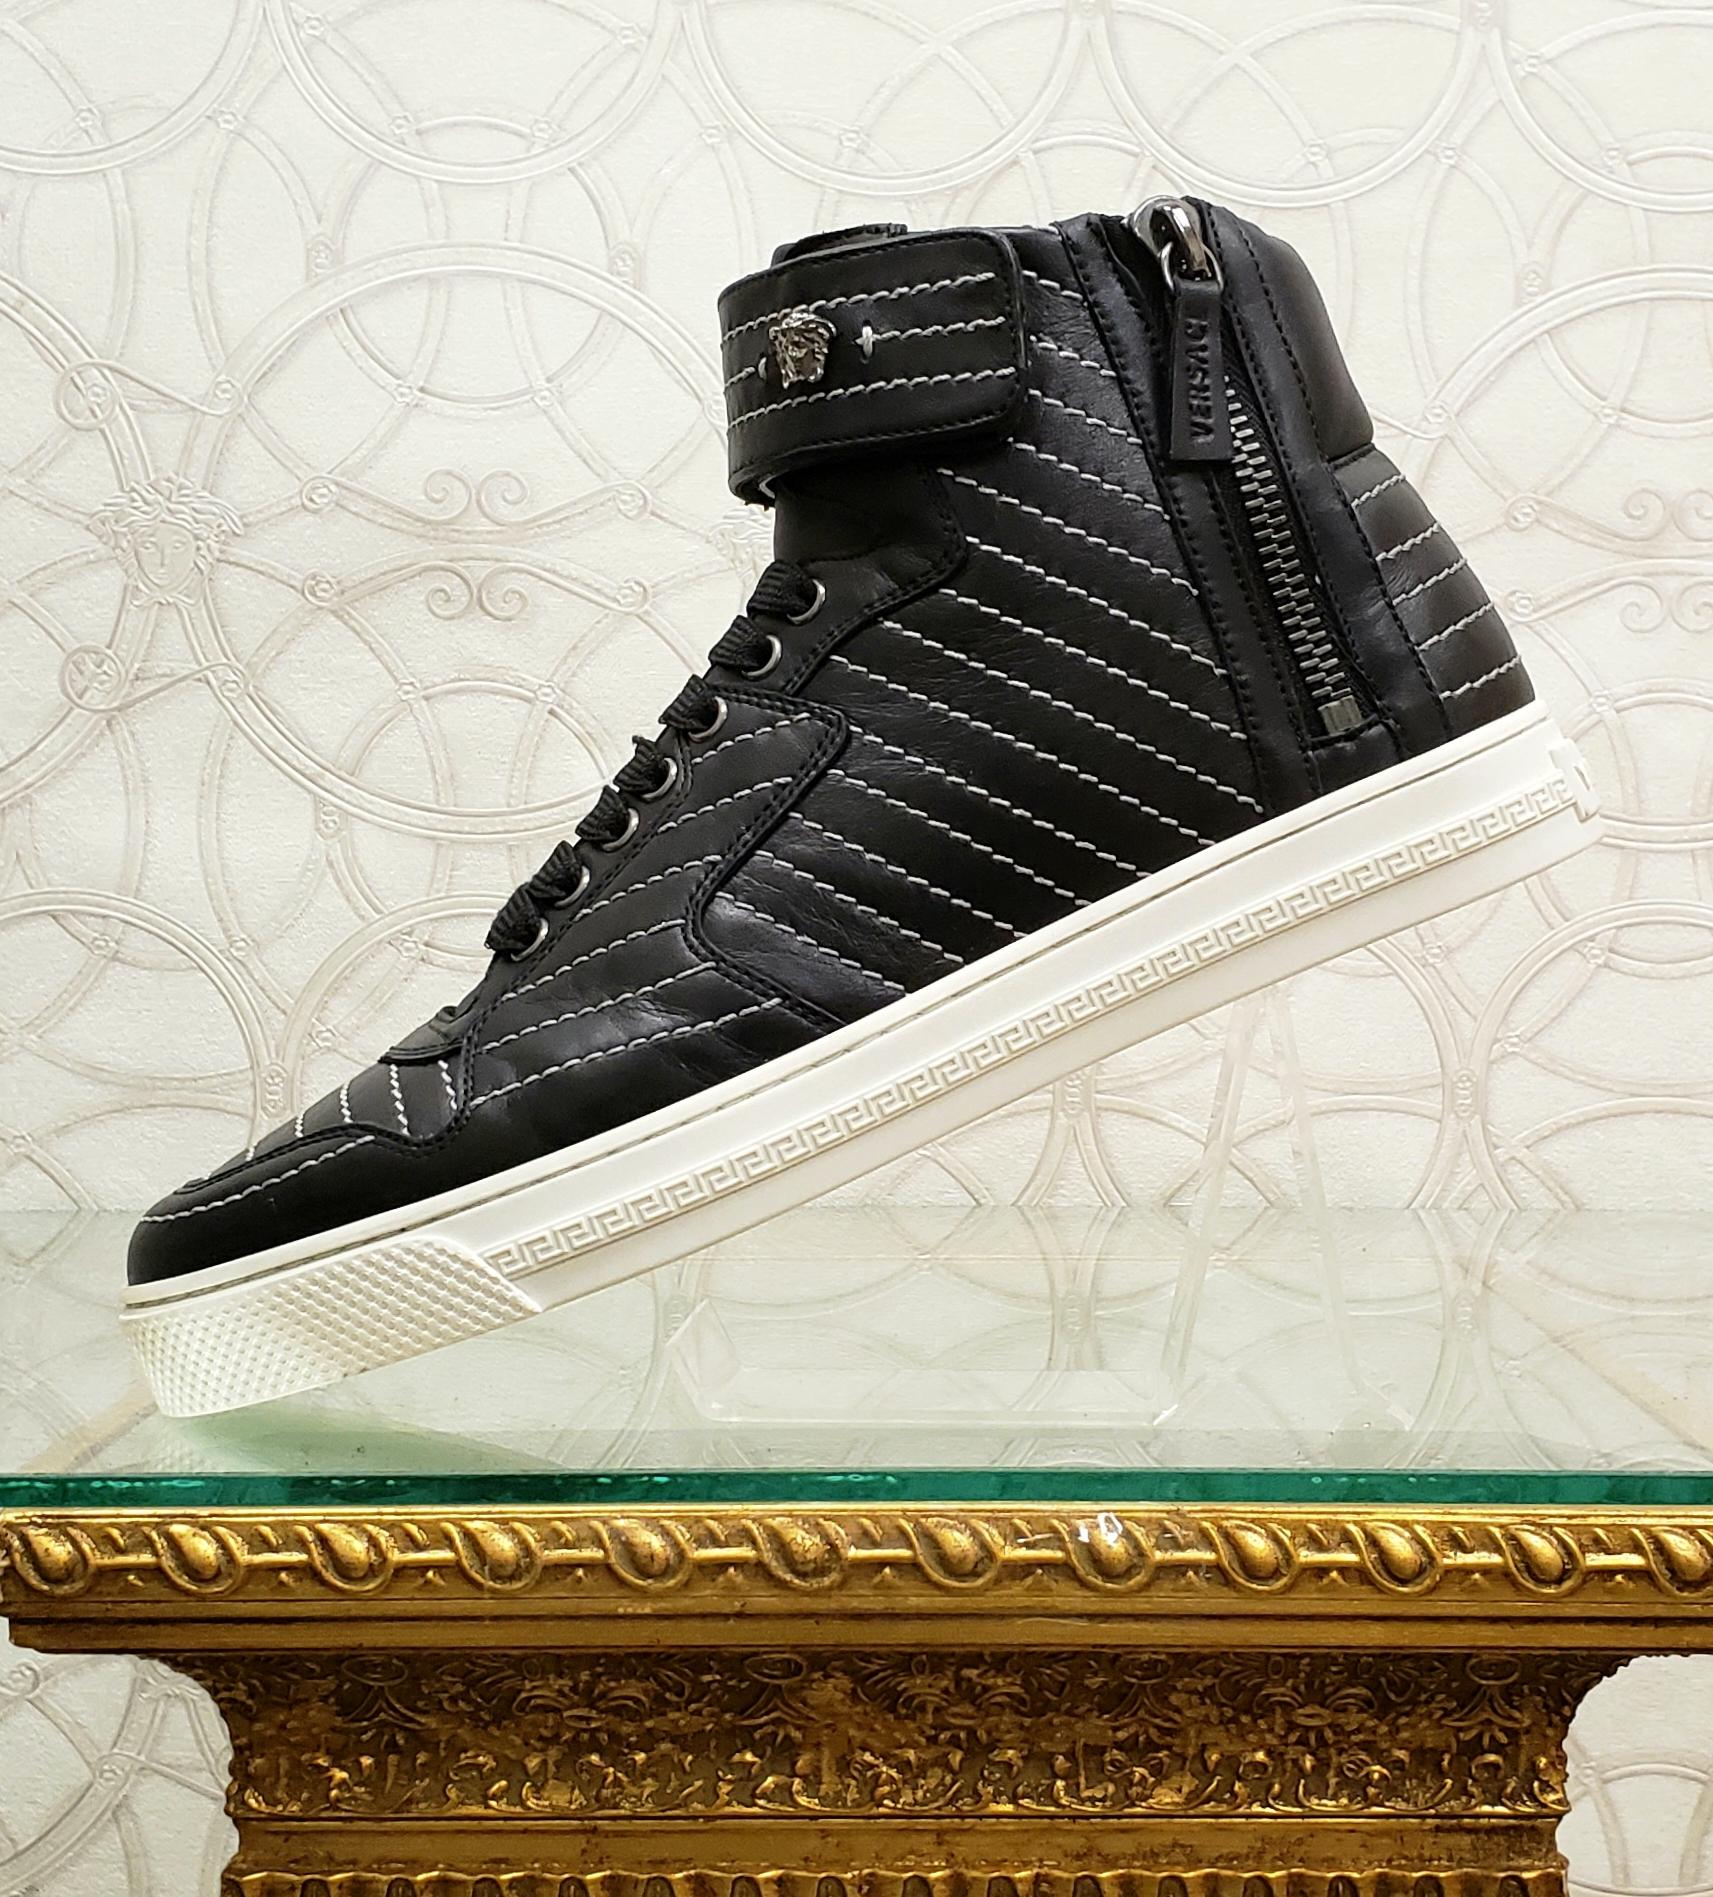 Black NEW VERSACE STUDDED HIGH-TOP SNEAKERS with SILVER MEDUSA side ZIPPER 41 - 8